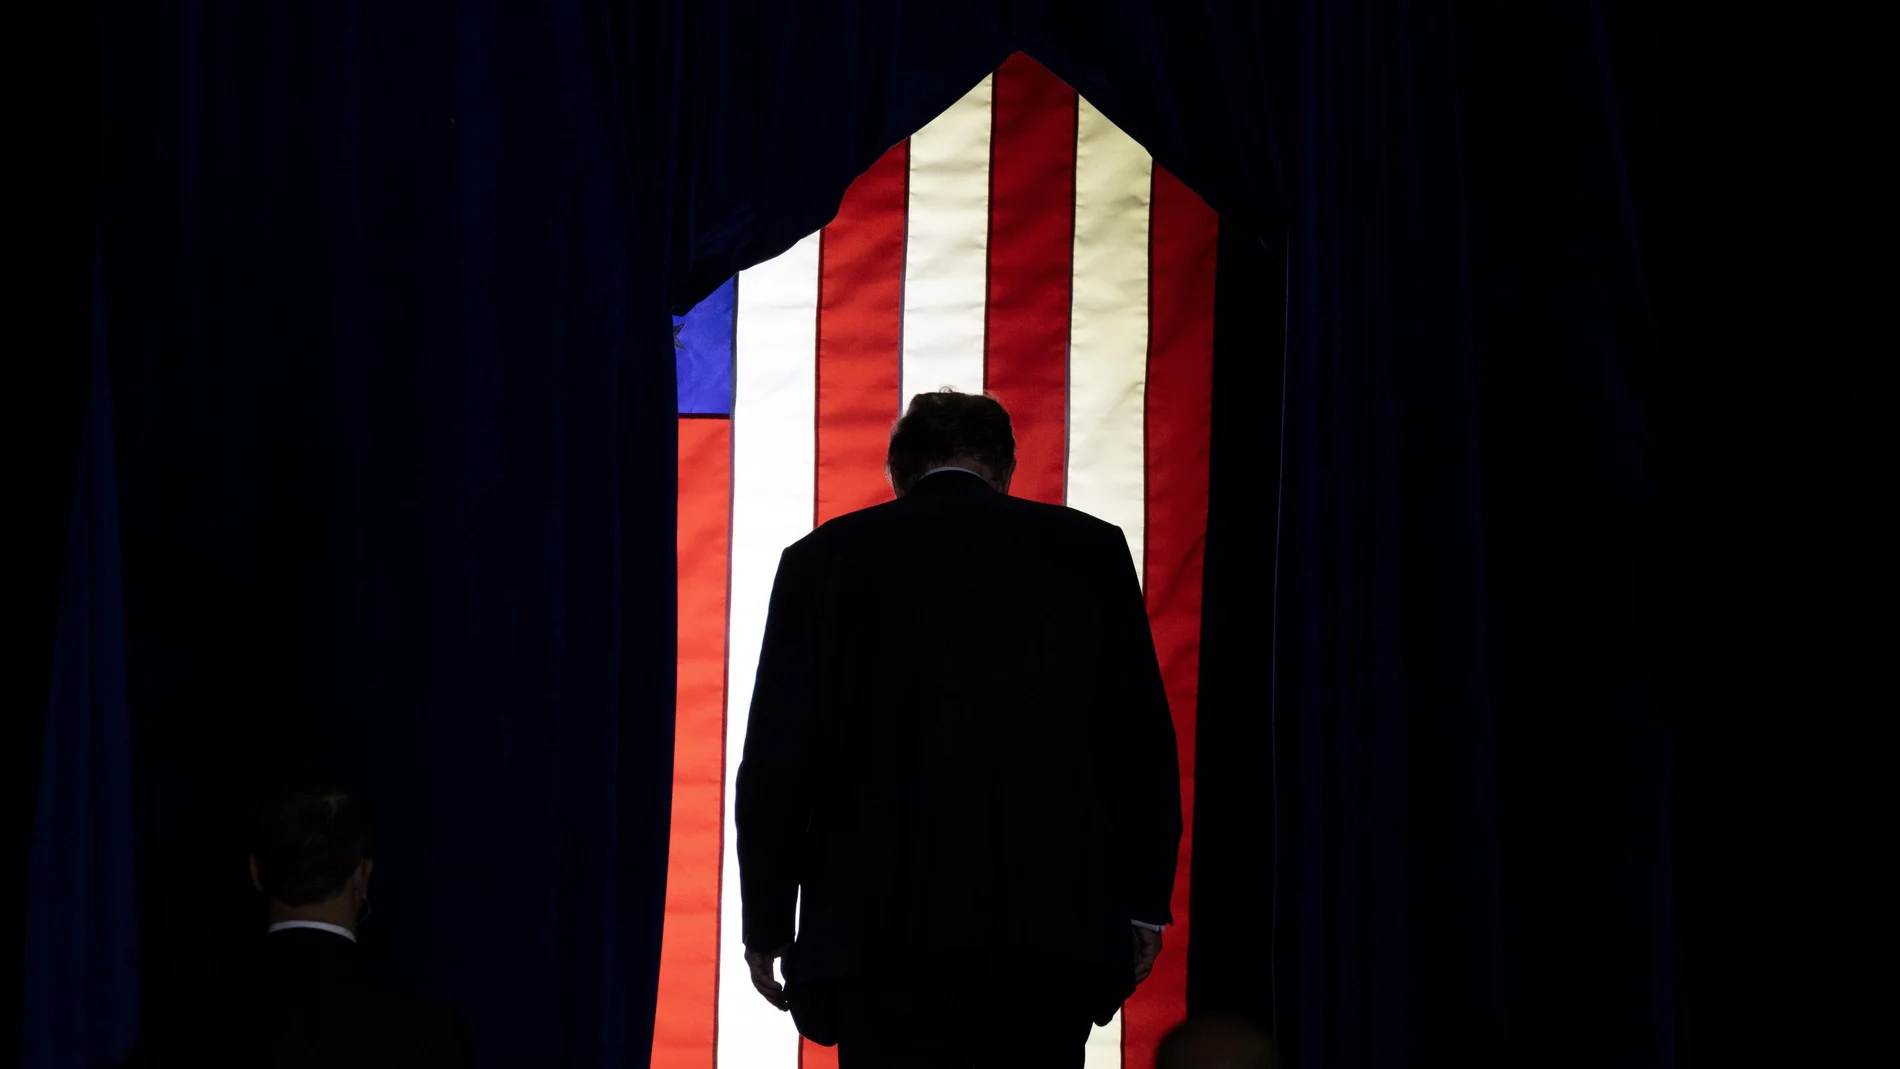 Former US President Donald J. Trump leaves at the conclusion of a campaign rally at SNHU Arena in Manchester, New Hampshire.